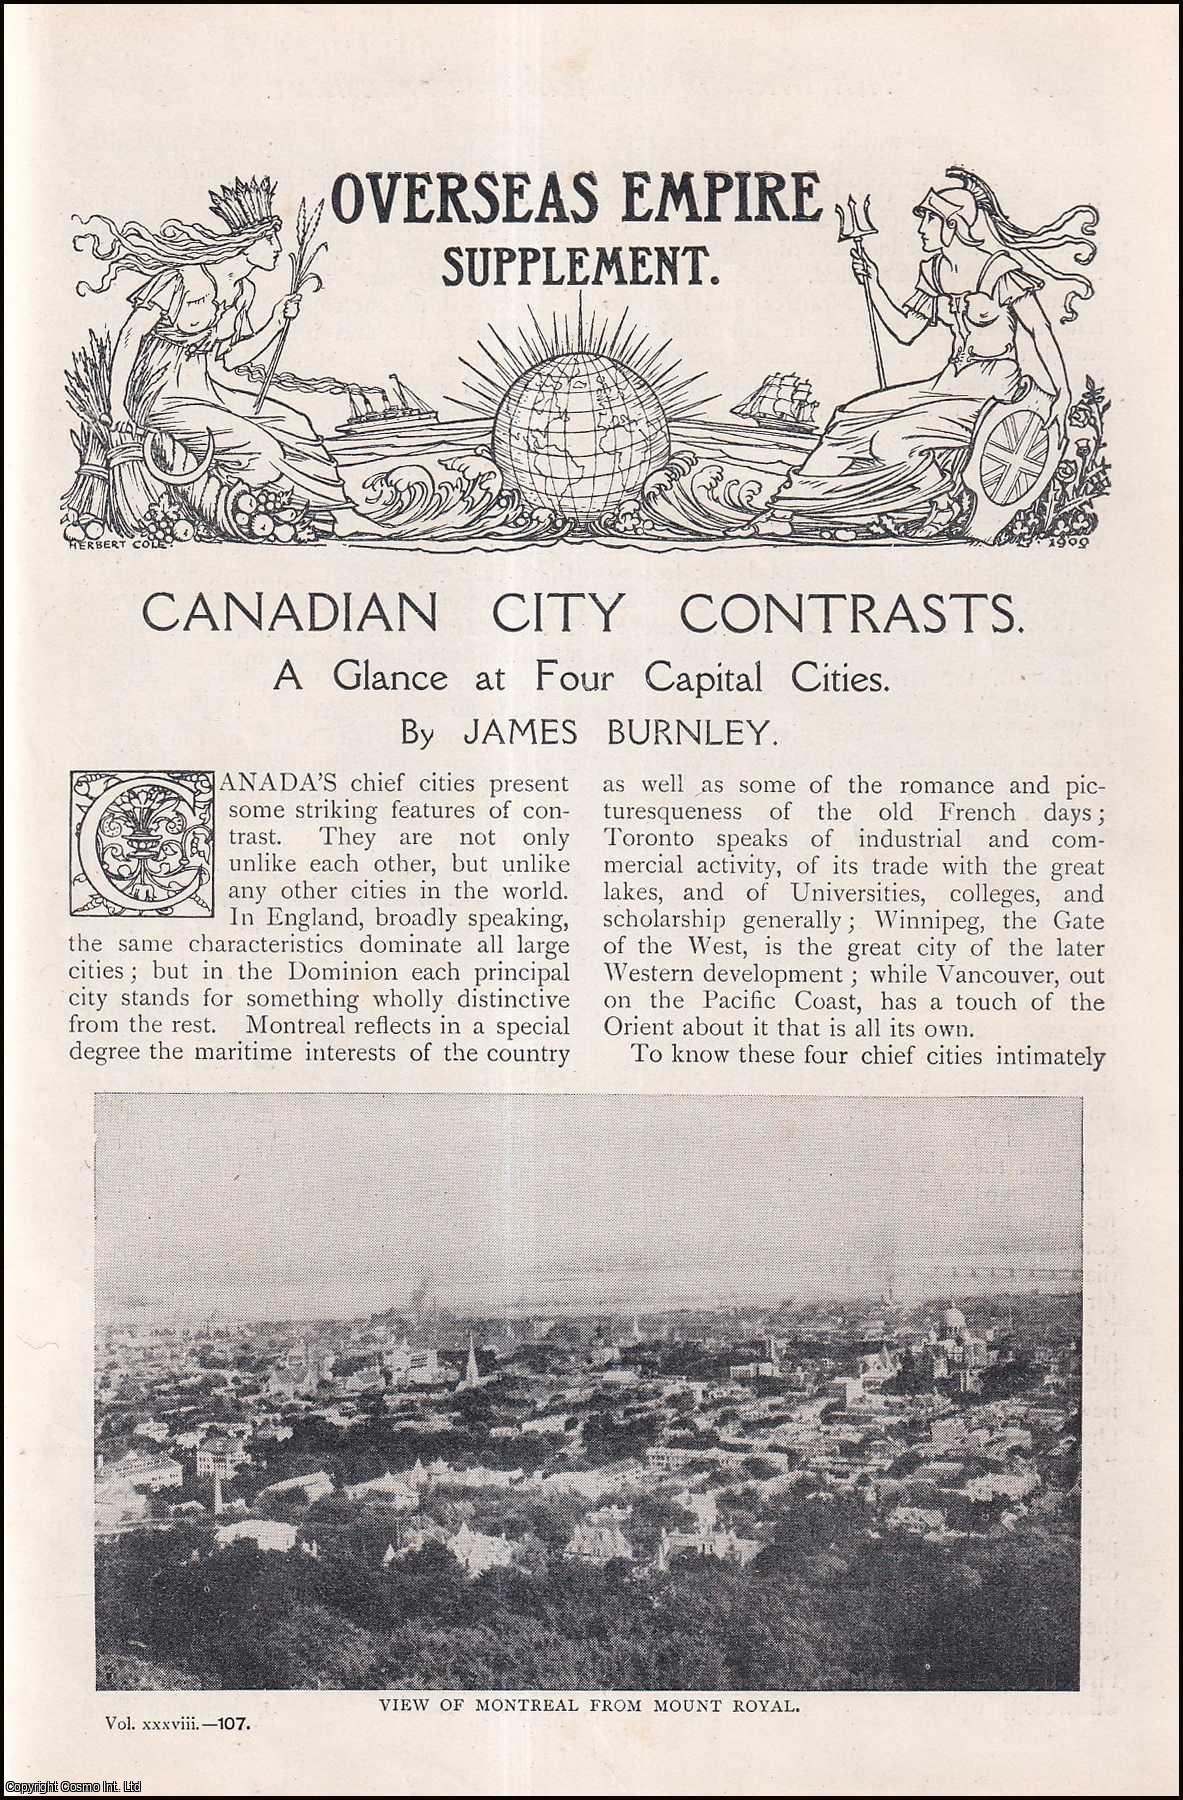 --- - Canadian Vity Contrasts. A Glance at Four Capital Cities. A rare original article from The Strand Magazine, 1909.